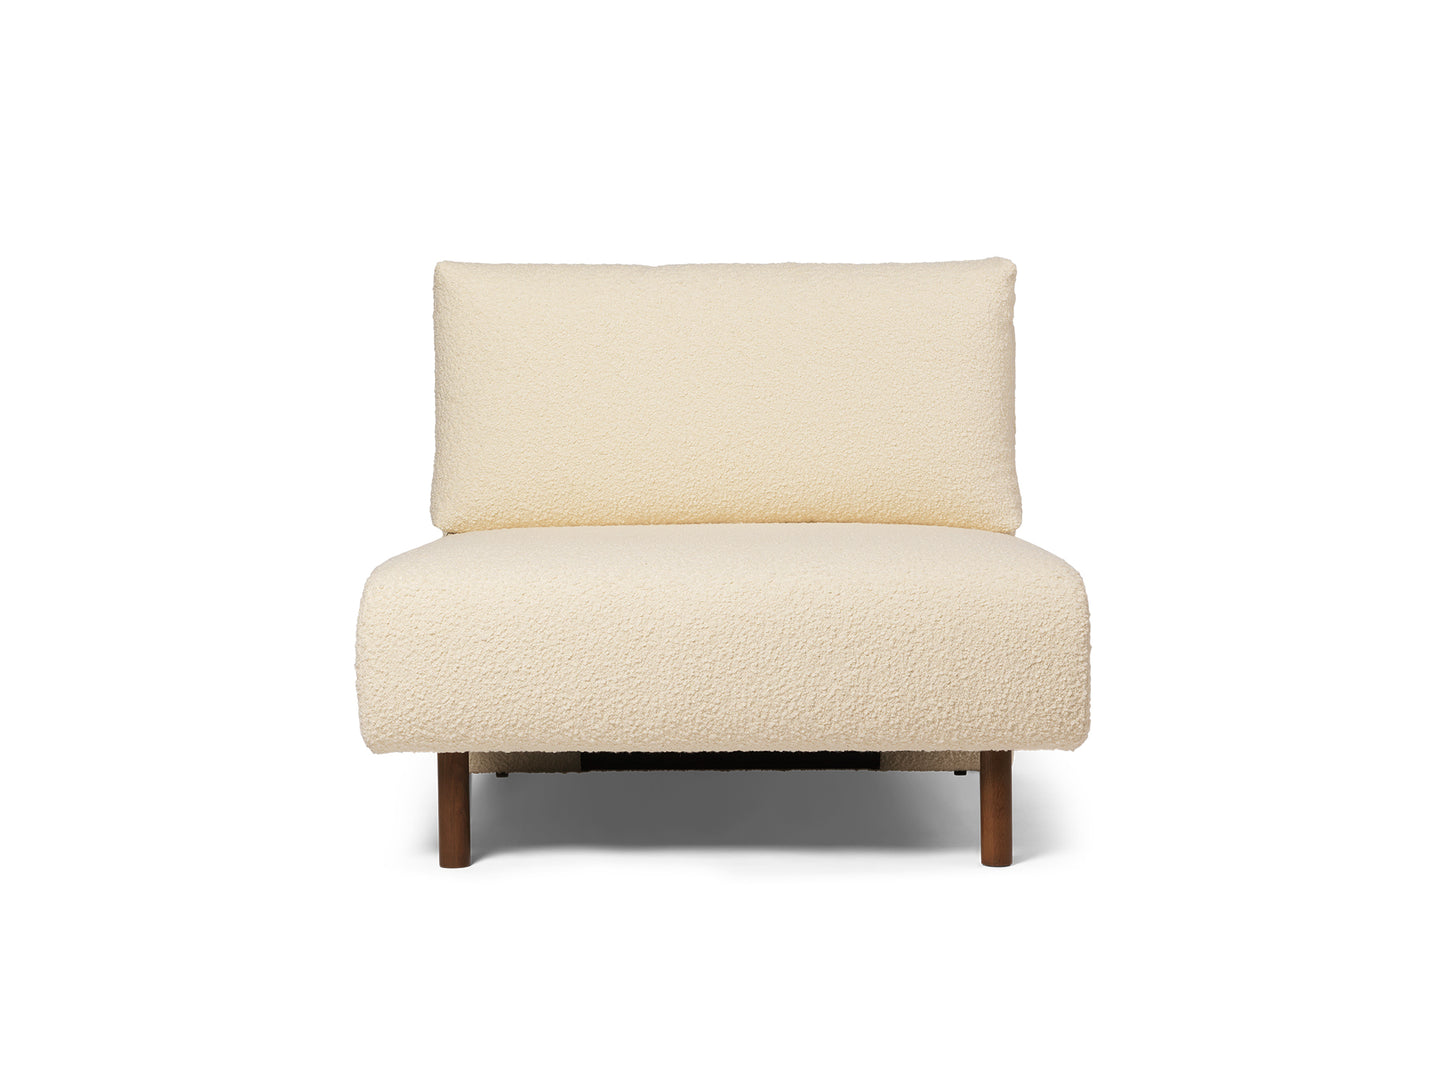 Dase Modular Sofa - Individual Modules by Ferm Living - Centre Module / Nordic Boucle / Off White